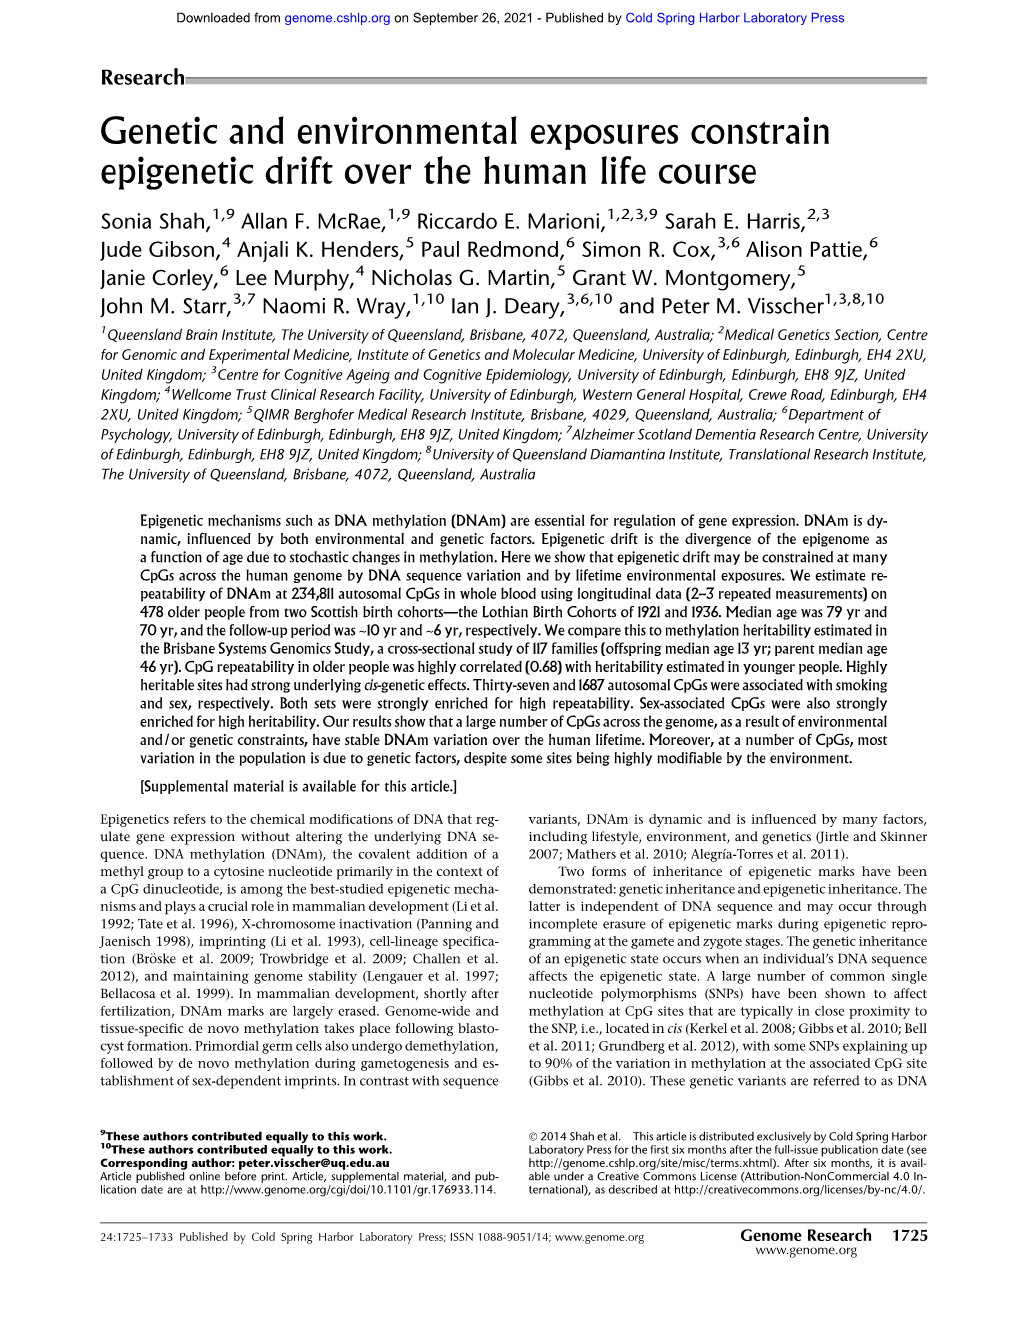 Genetic and Environmental Exposures Constrain Epigenetic Drift Over the Human Life Course